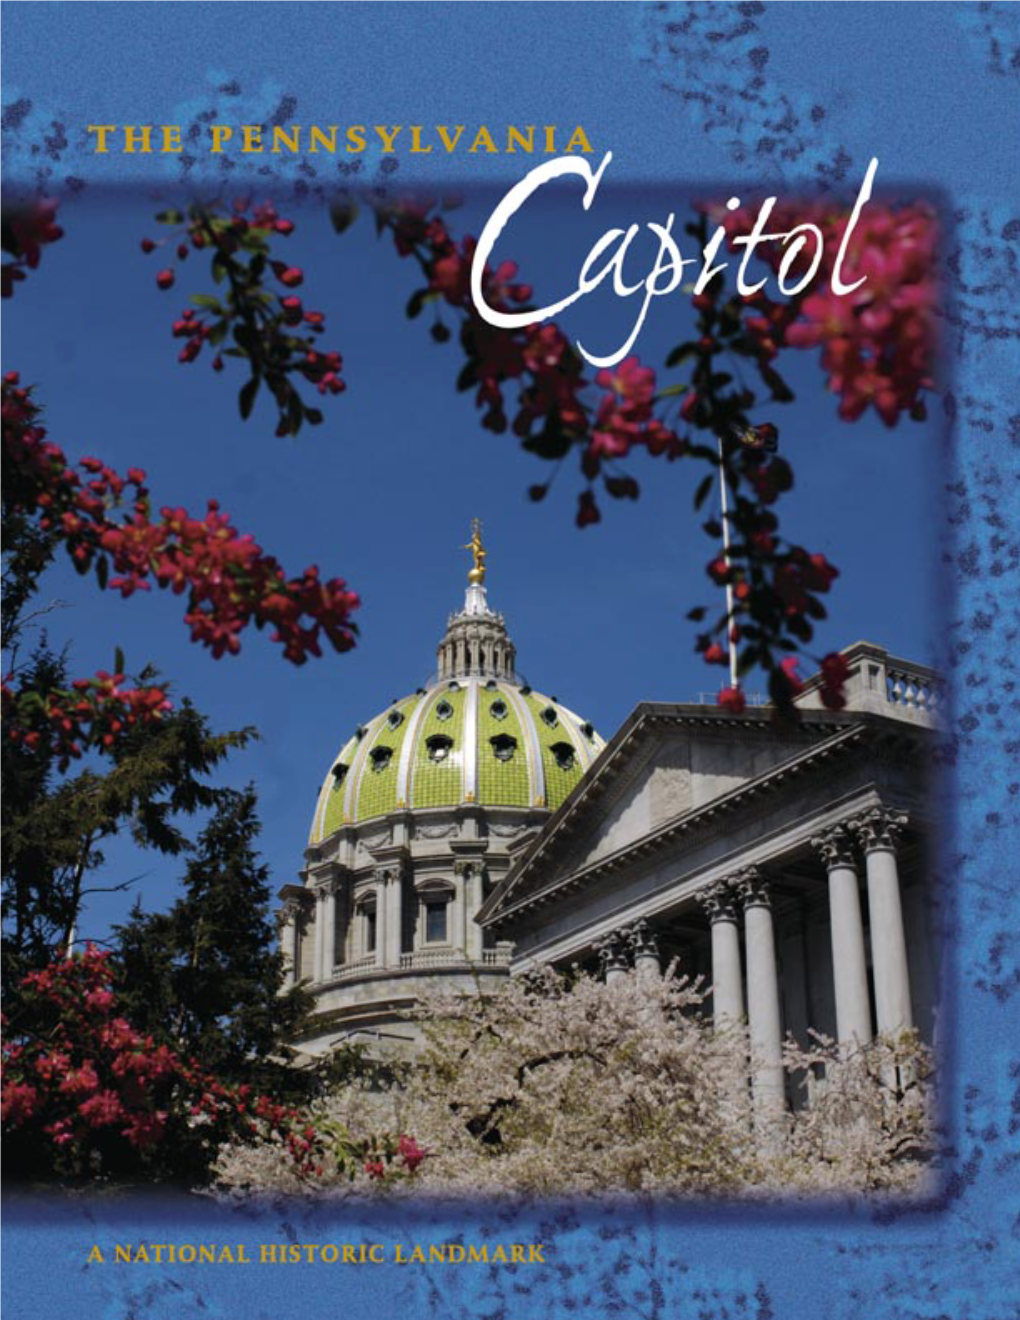 The Pennsylvania Capitol Shop Is Located in the East Wing and Is Open from 10 A.M